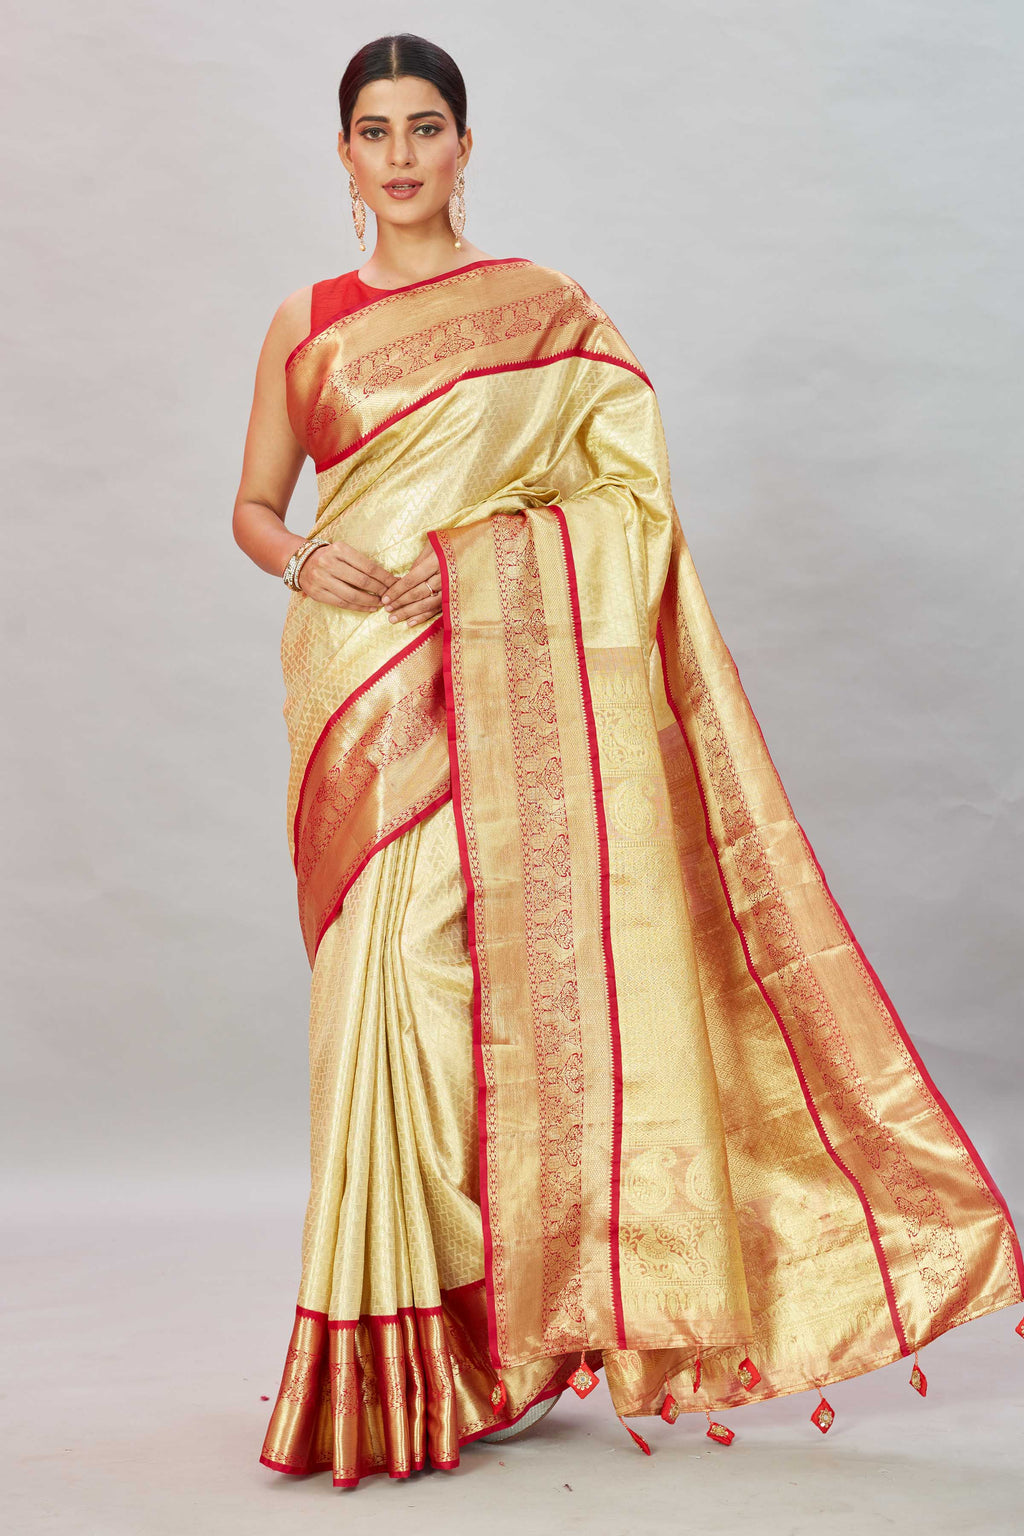 Buy cream Kanjivaram silk sari online in USA with red zari border. Look your best on festive occasions in latest designer sarees, pure silk sarees, Kanjivaram silk saris, handwoven saris, tussar silk sarees, embroidered saris from Pure Elegance Indian clothing store in USA.-full view